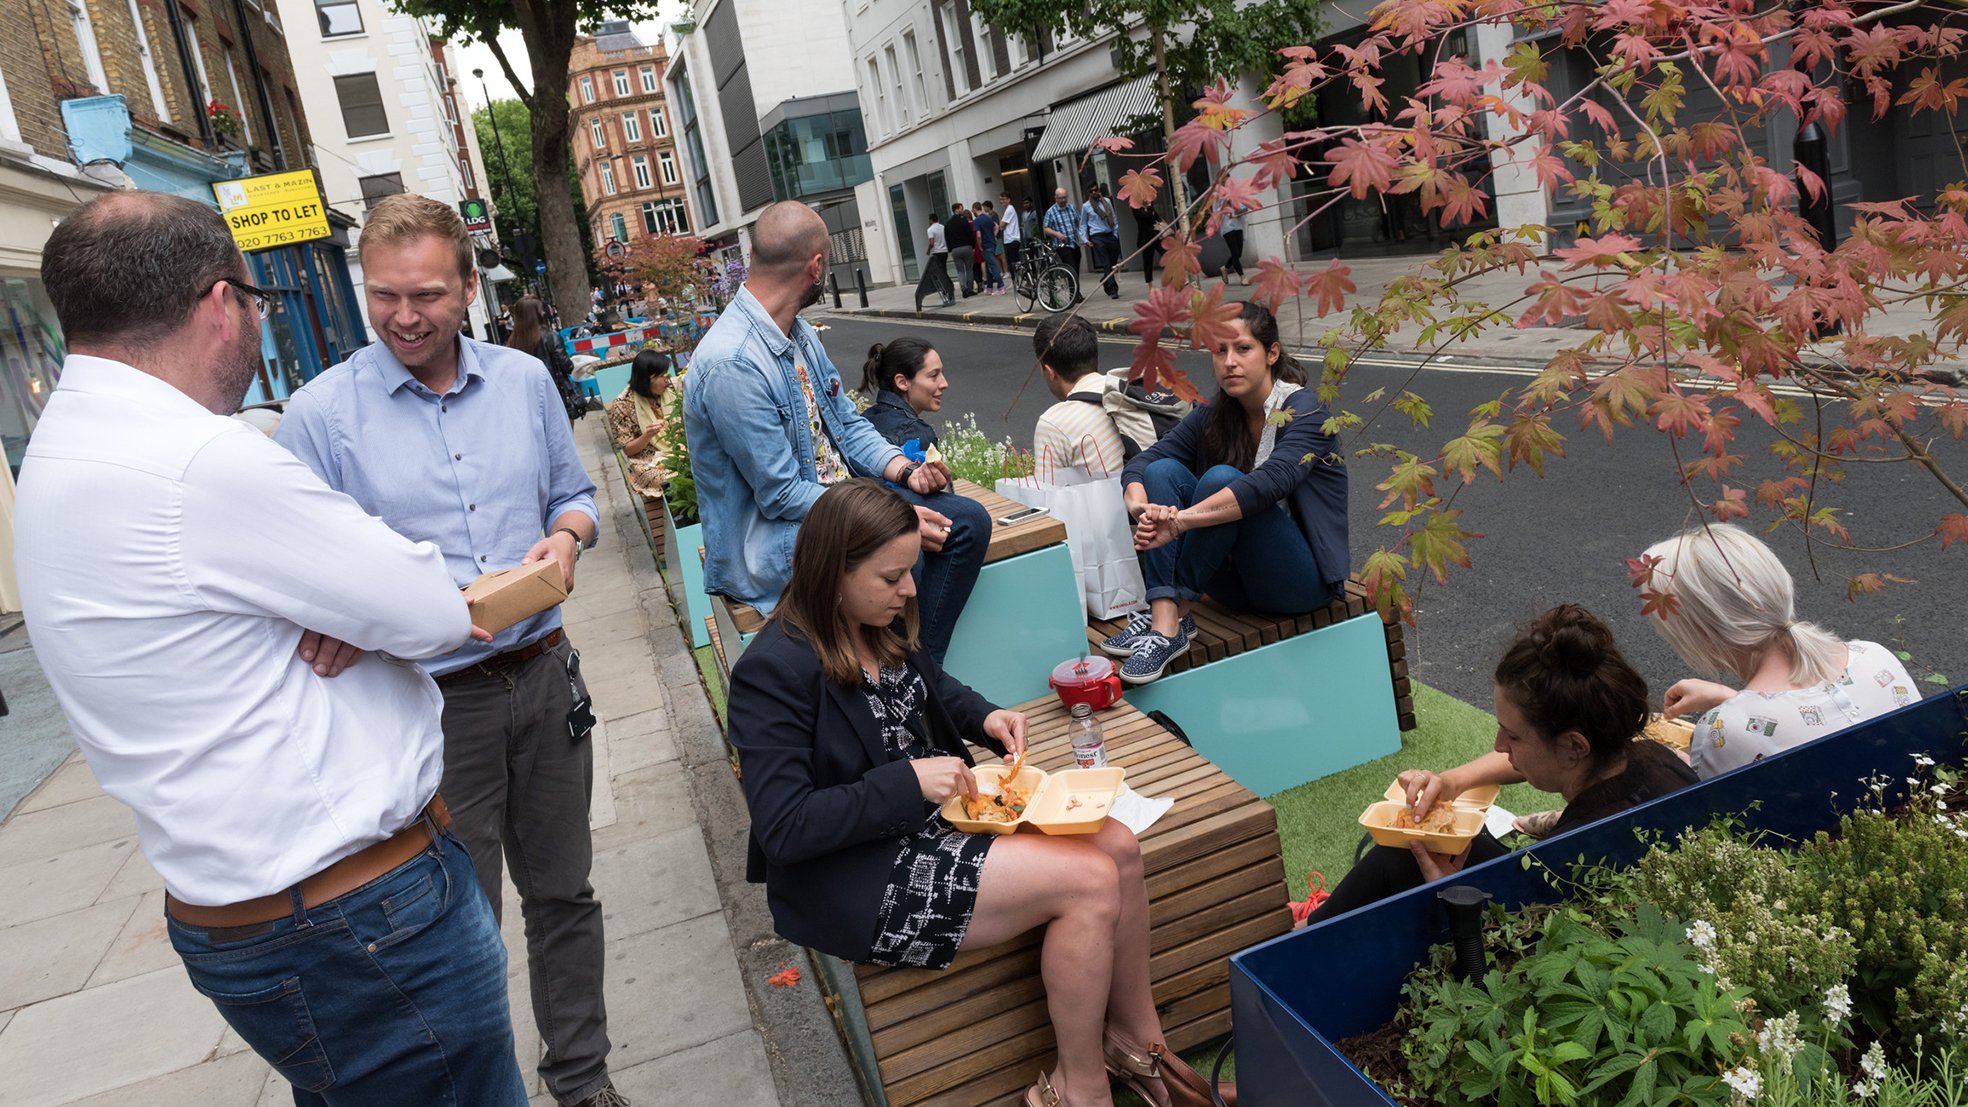 Visitors to FitzPark, a new parklet in London's Fitzrovia designed by Arup's Landscape Architecture team